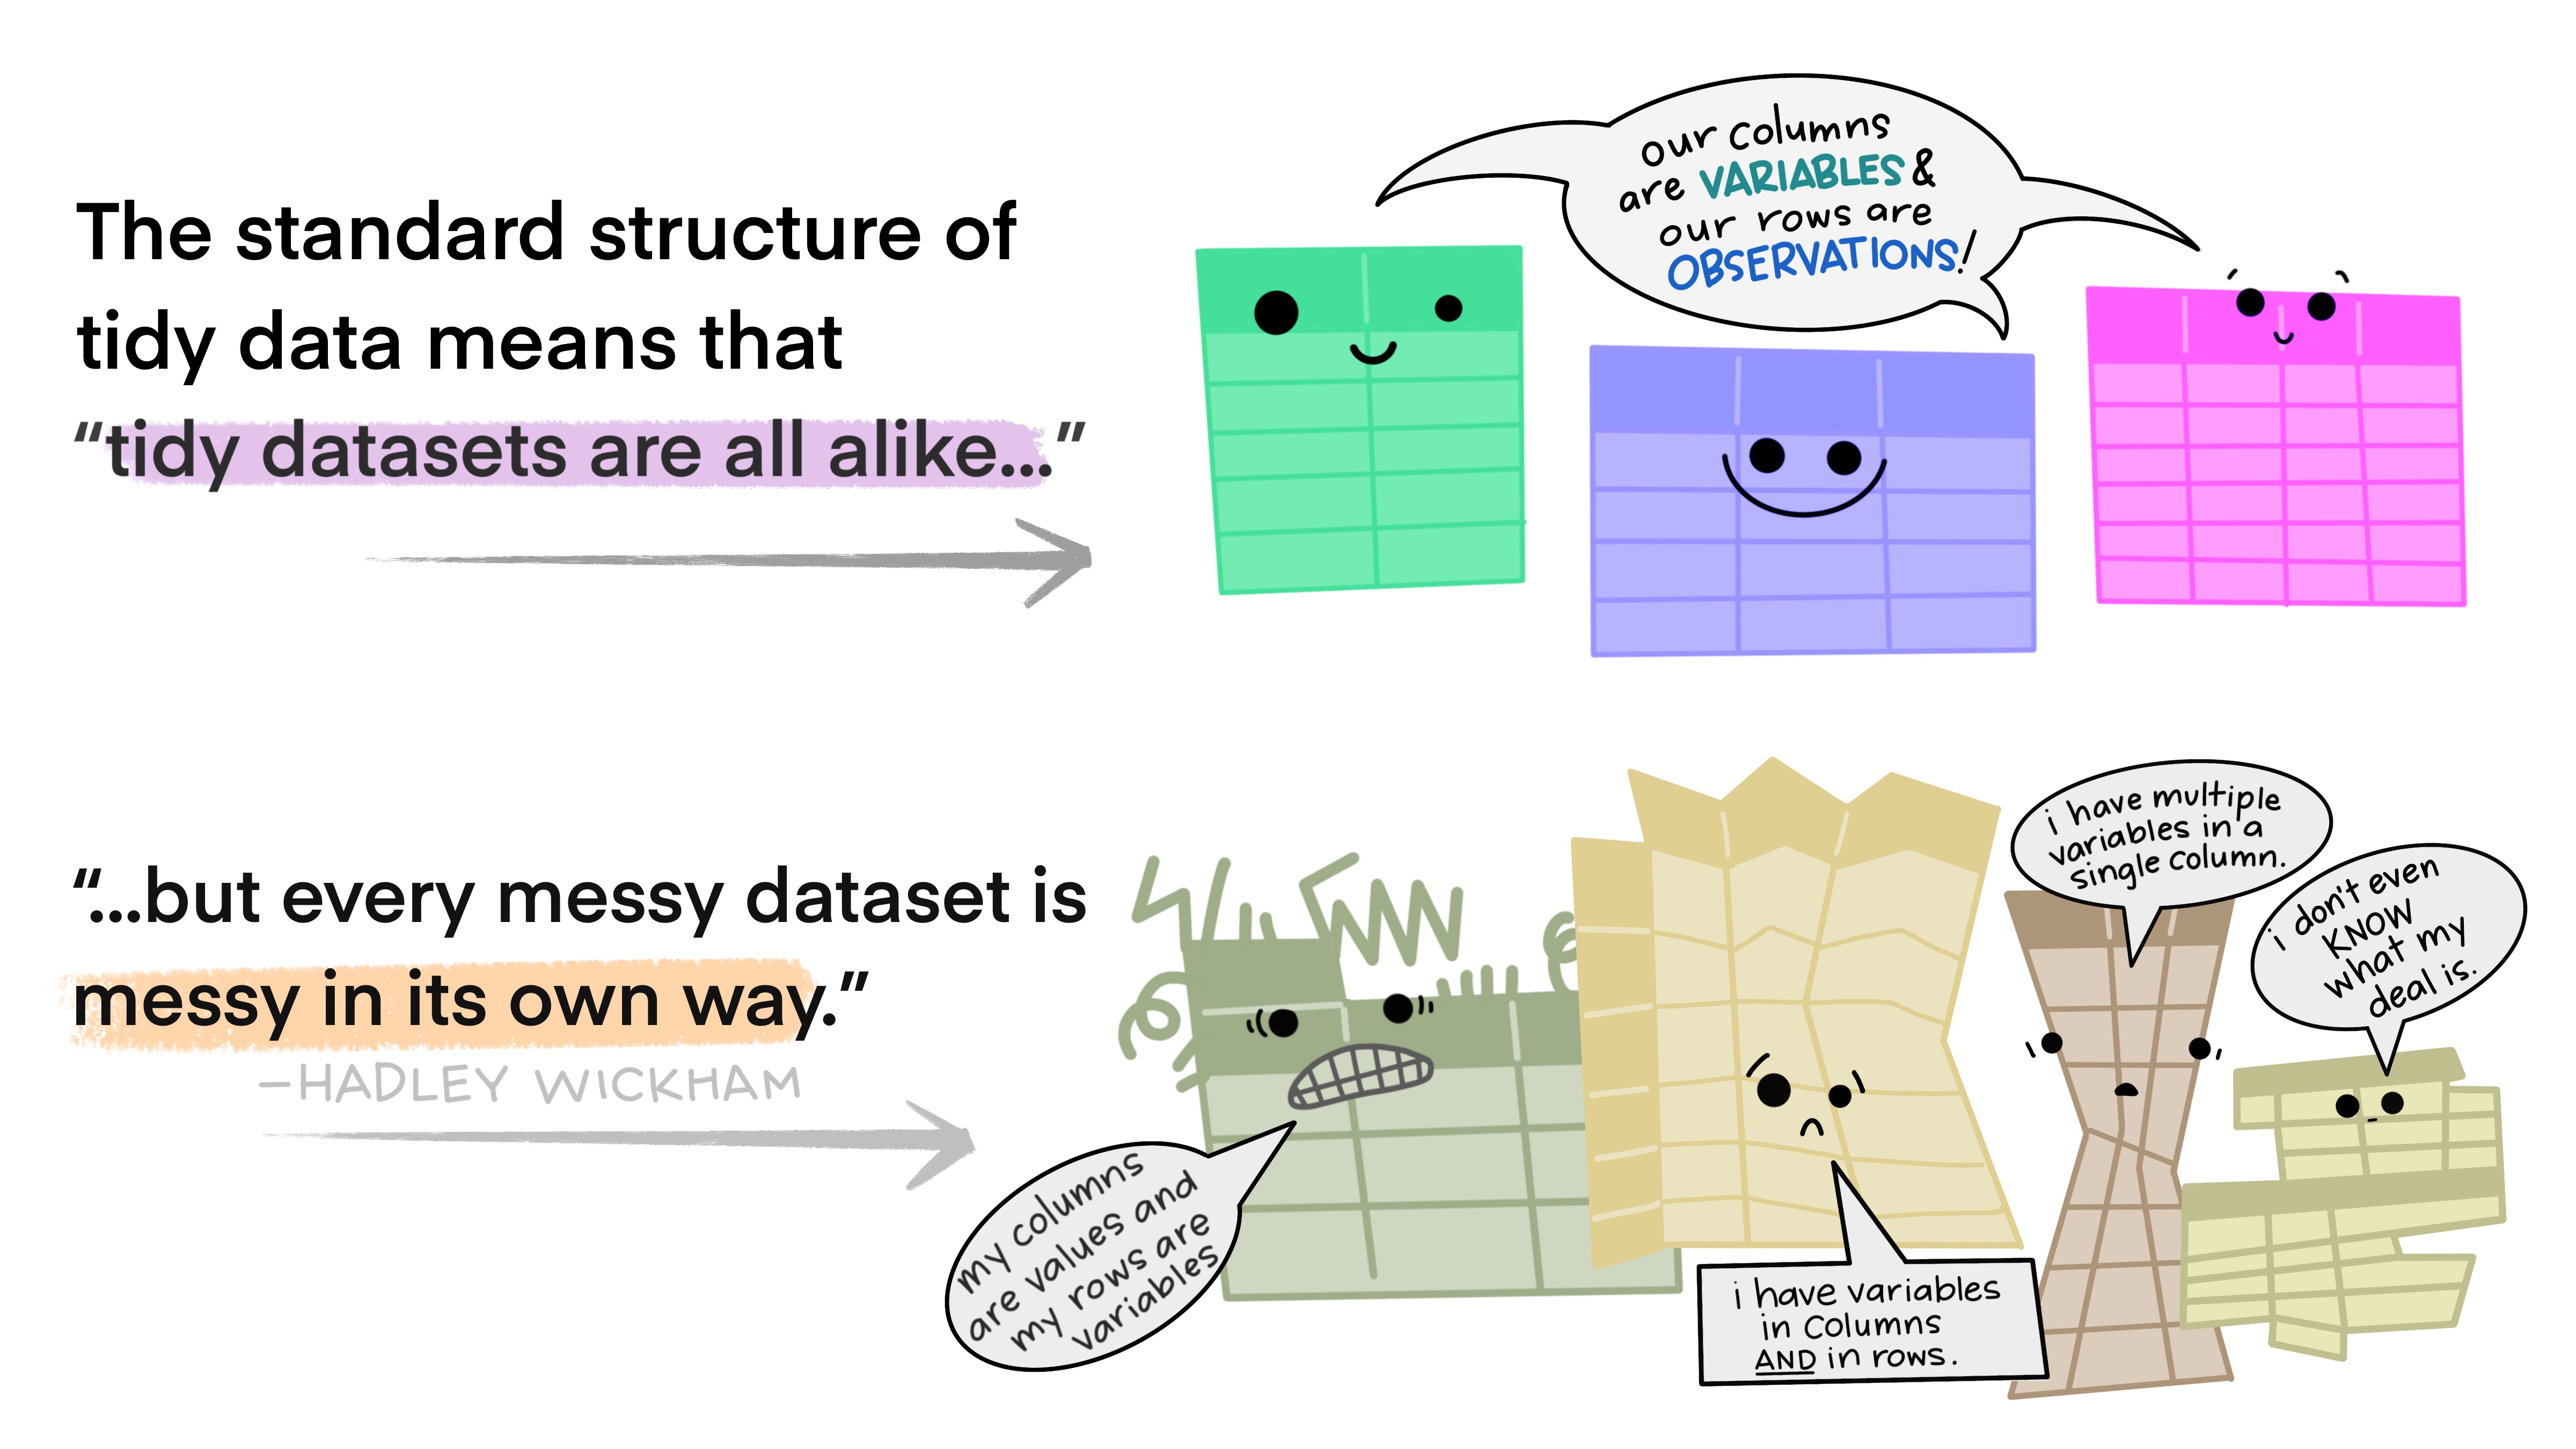 Tidy data principles mean that all datasets follow the same rules. Artwork @allison_horst